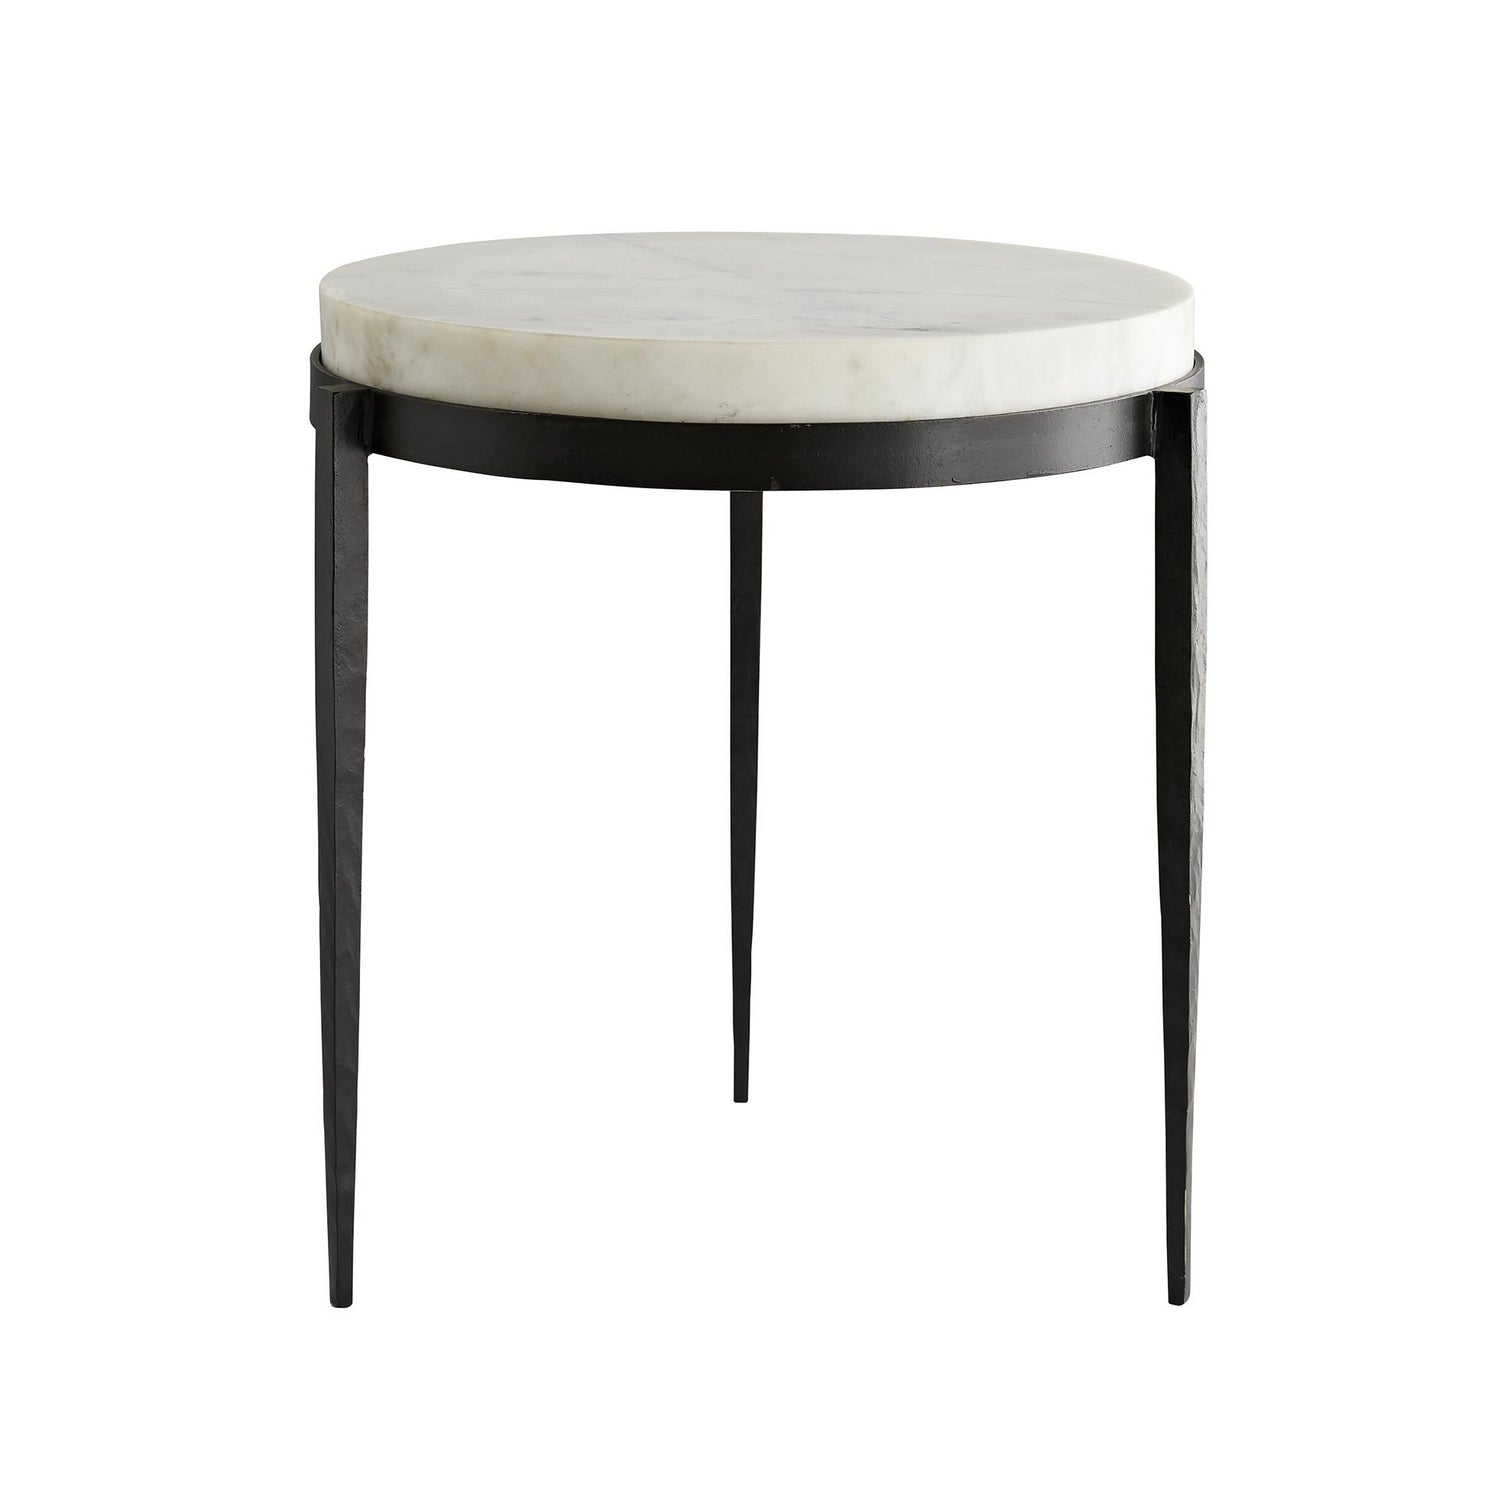 Side Table from the Kelsie collection in Black finish